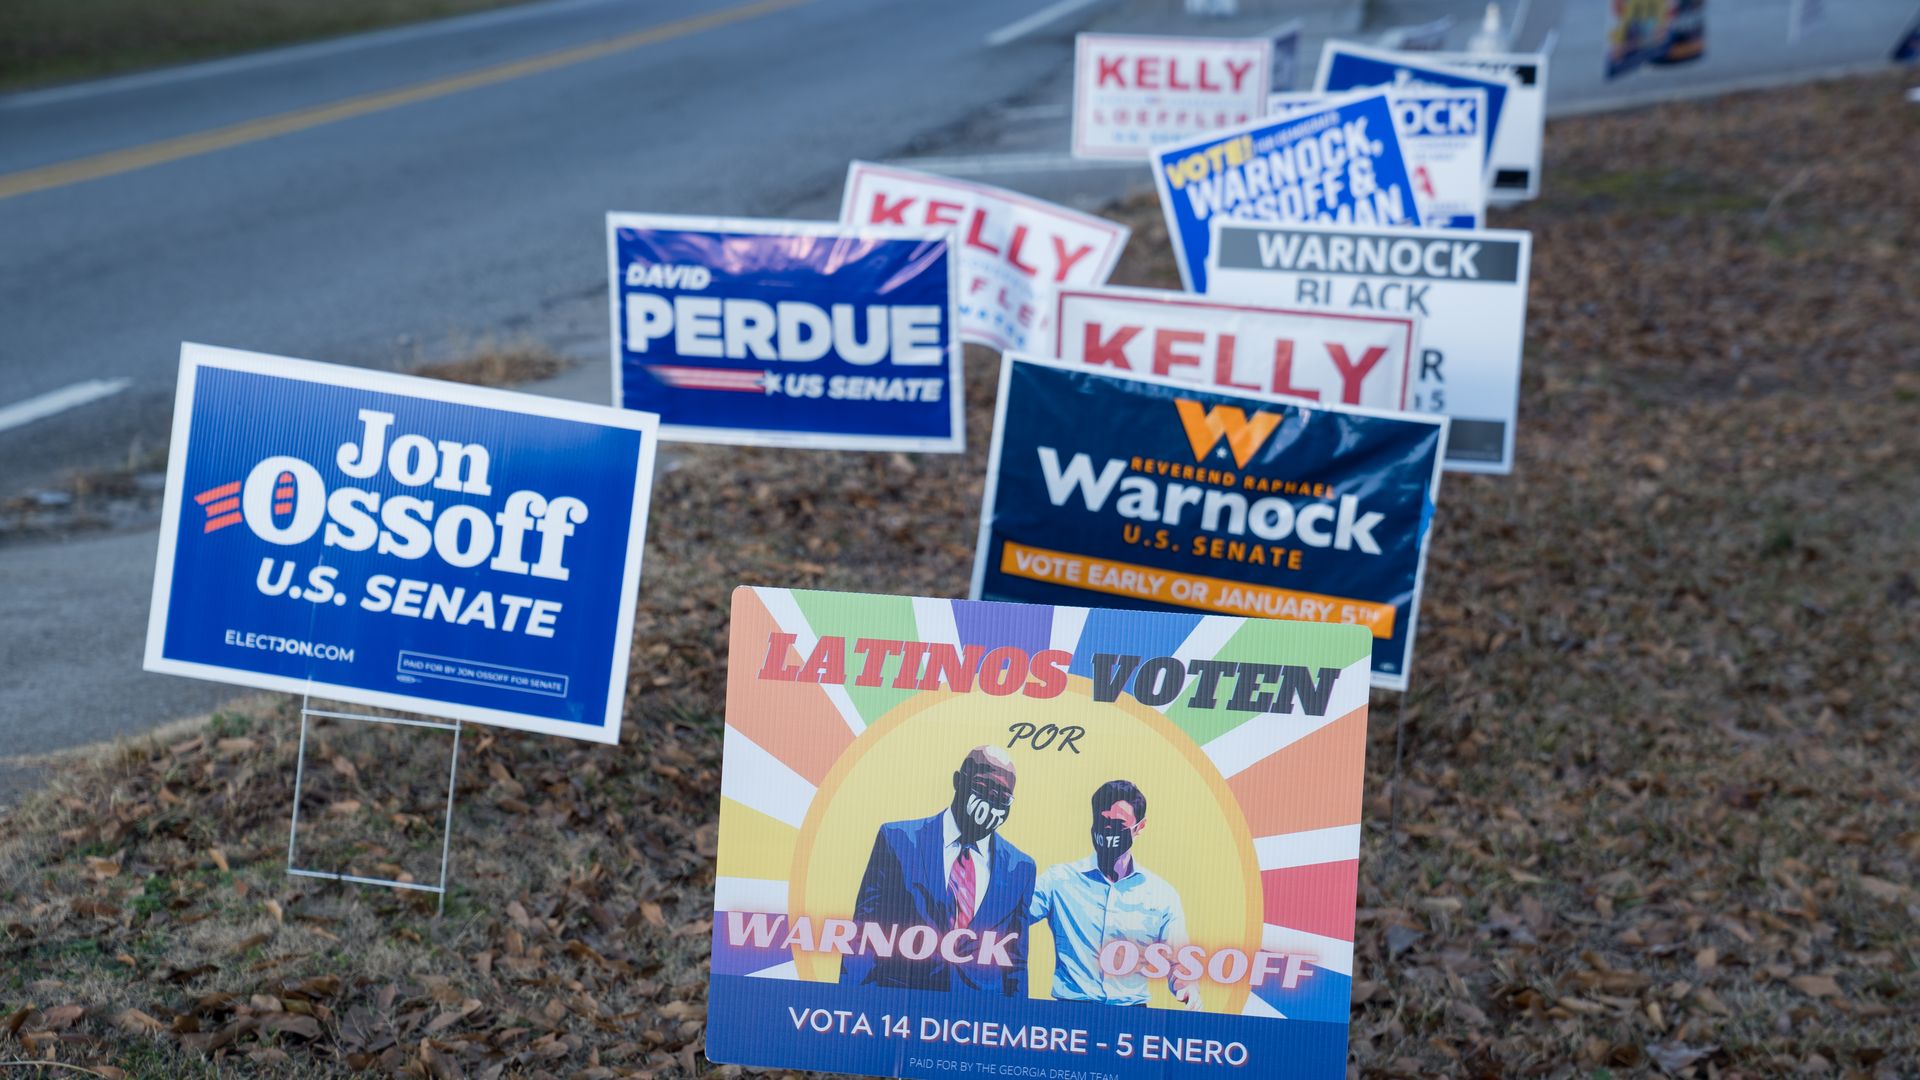 Candidate signs are seen lining a road in Gwinnett County, Ga., today before the state's pivotal U.S. Senate runoff elections.